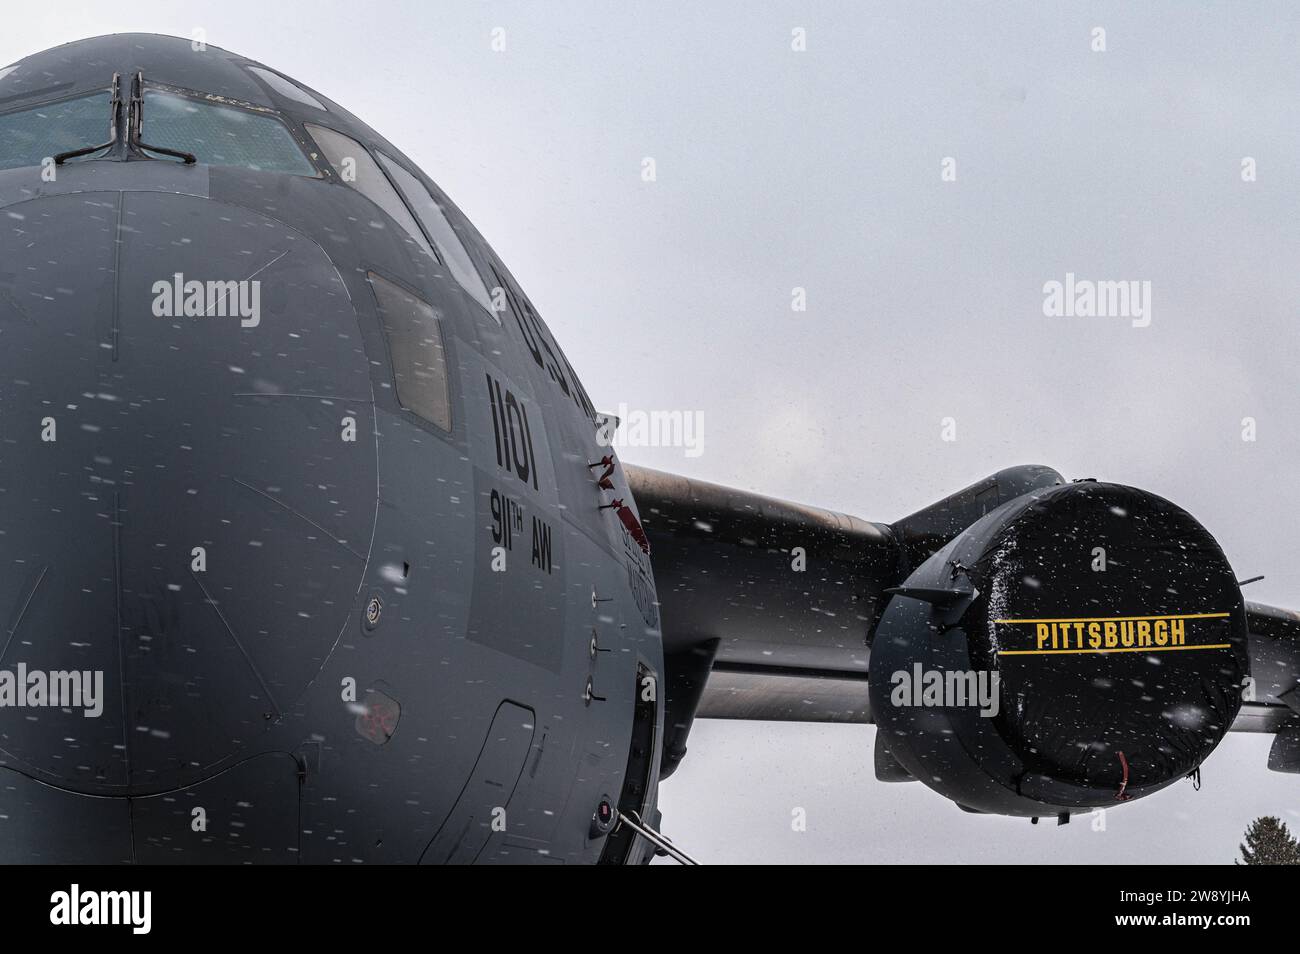 A C-17 Globemaster III assigned to the 911th Airlift Wing sits on the flightline at Pittsburgh International Airport Air Reserve Station, Pennsylvania, Dec. 19, 2023. The C-17 measures approximately 174 feet in length with a wingspan of 169 feet, 10 inches. (U.S. Air Force photo by Tech. Sgt. Lucas M. Weber) Stock Photo